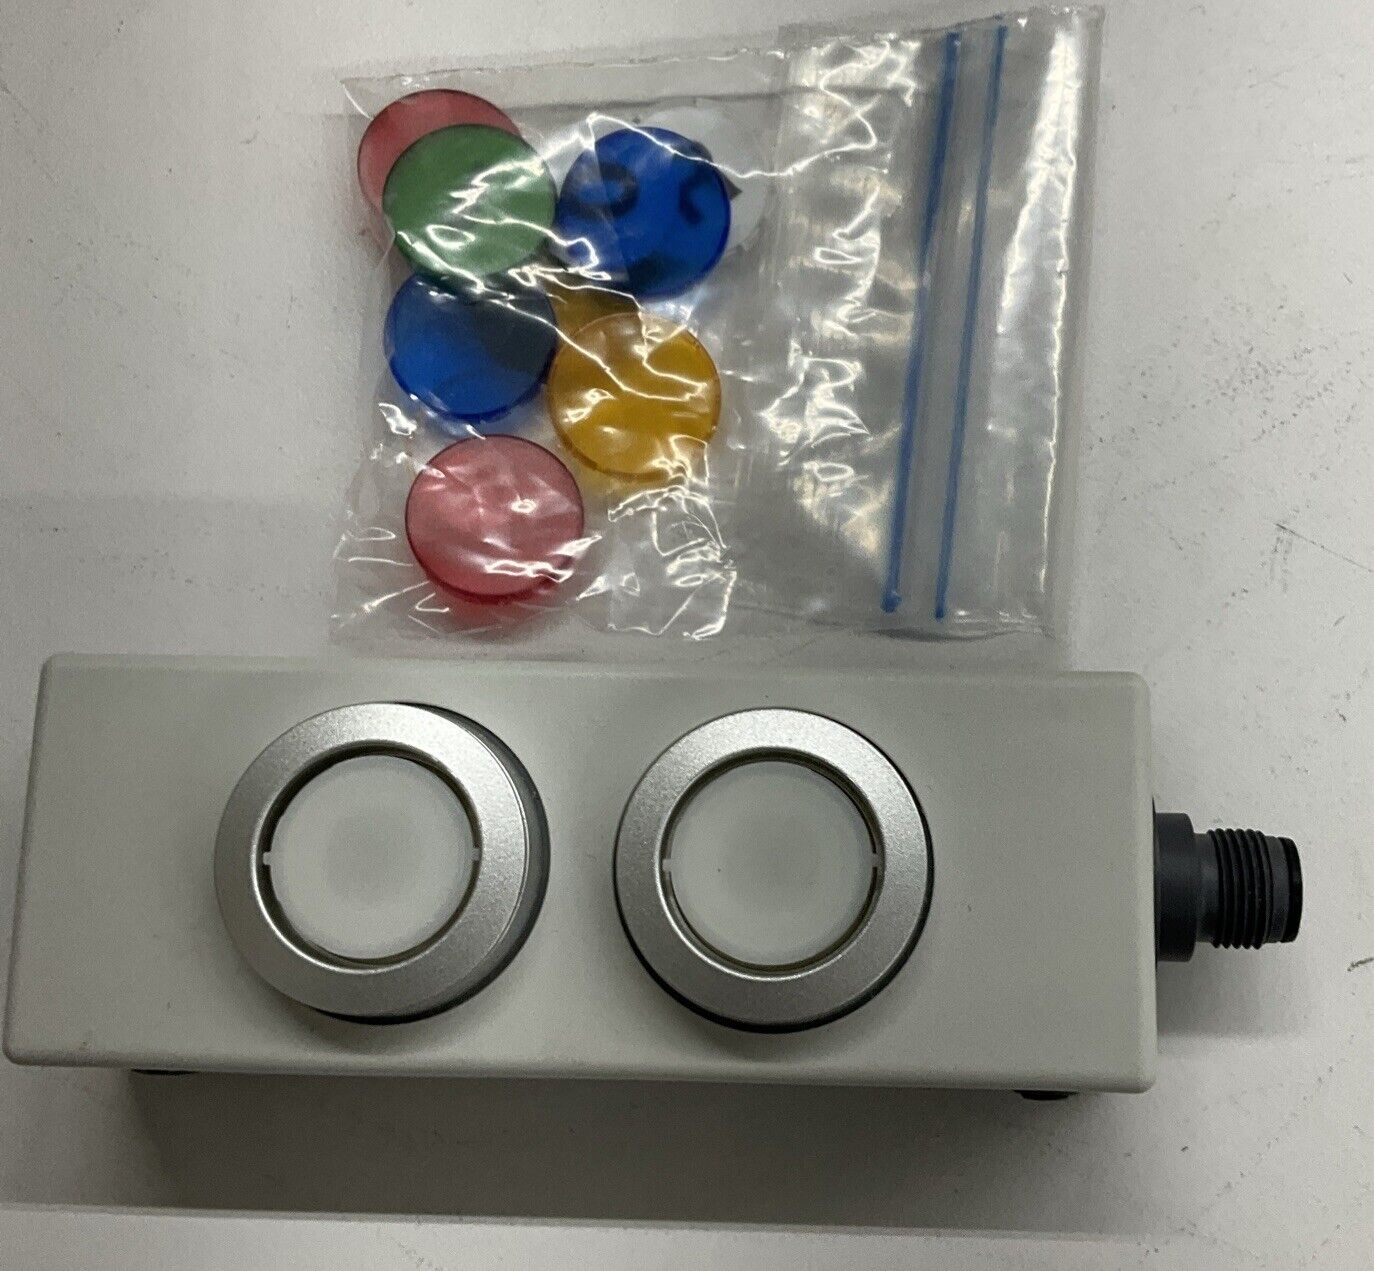 Murr 69011 Reset button with 2 push buttons (CL375)